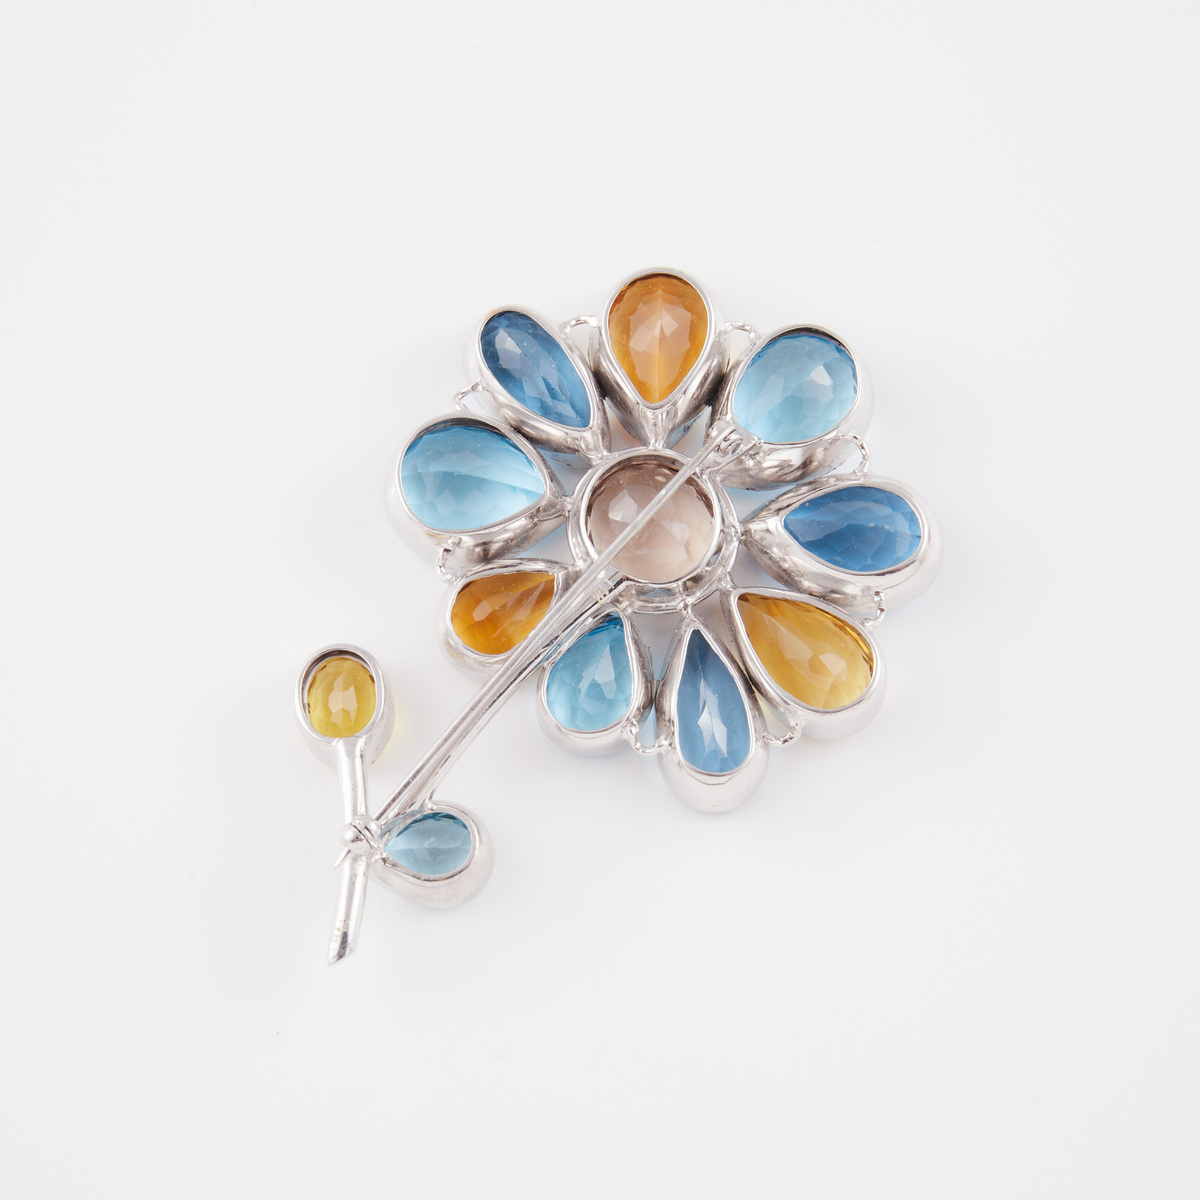 Large 14k White Gold Floral Brooch, bezel set with oval and pear cut blue topaz and citrine - Image 2 of 2